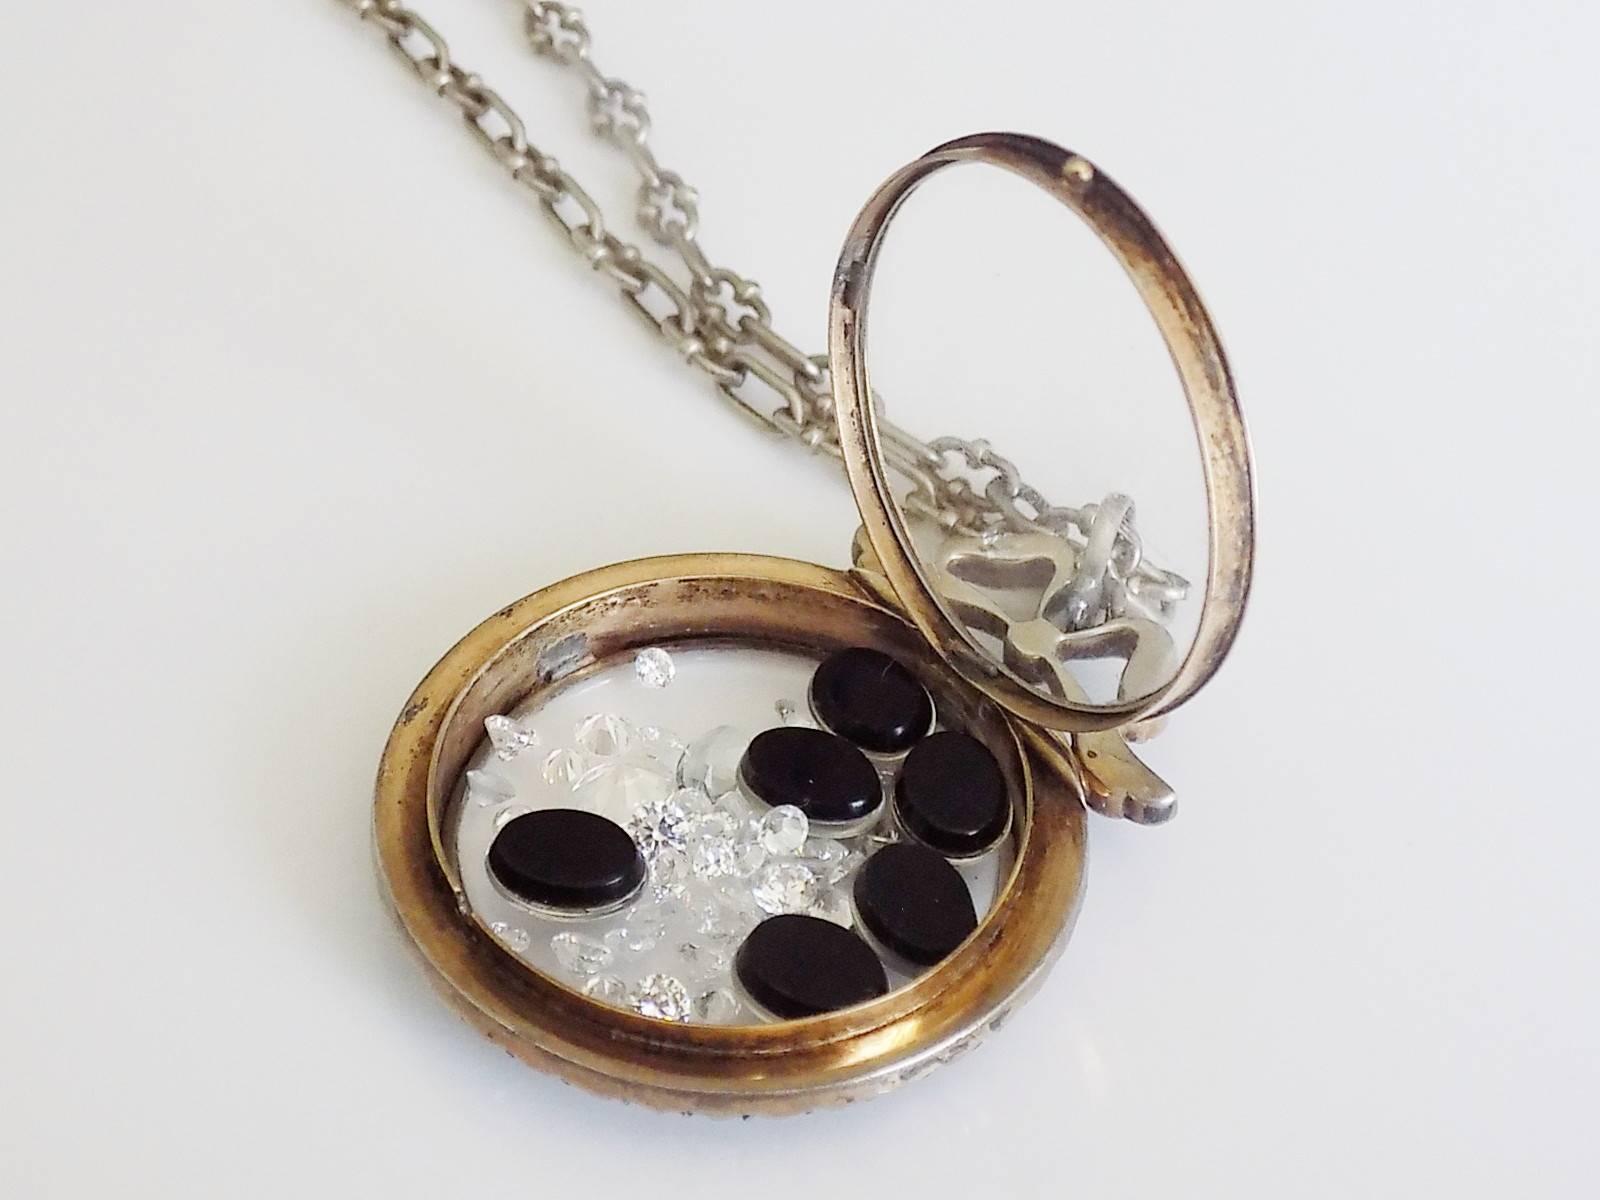 shaker necklace